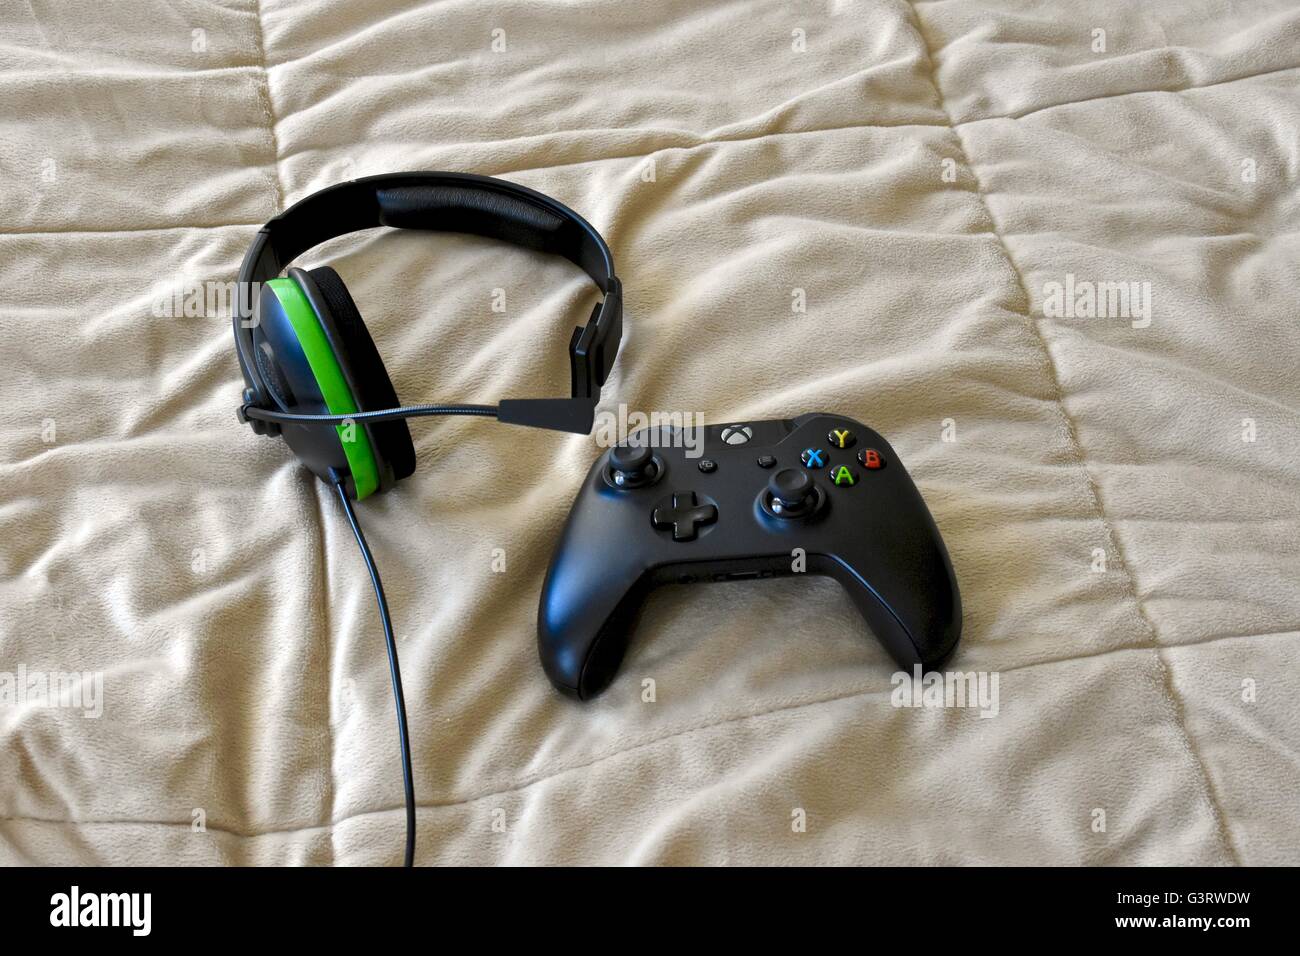 An Xbox One controller and headset laying on a bed Stock Photo - Alamy